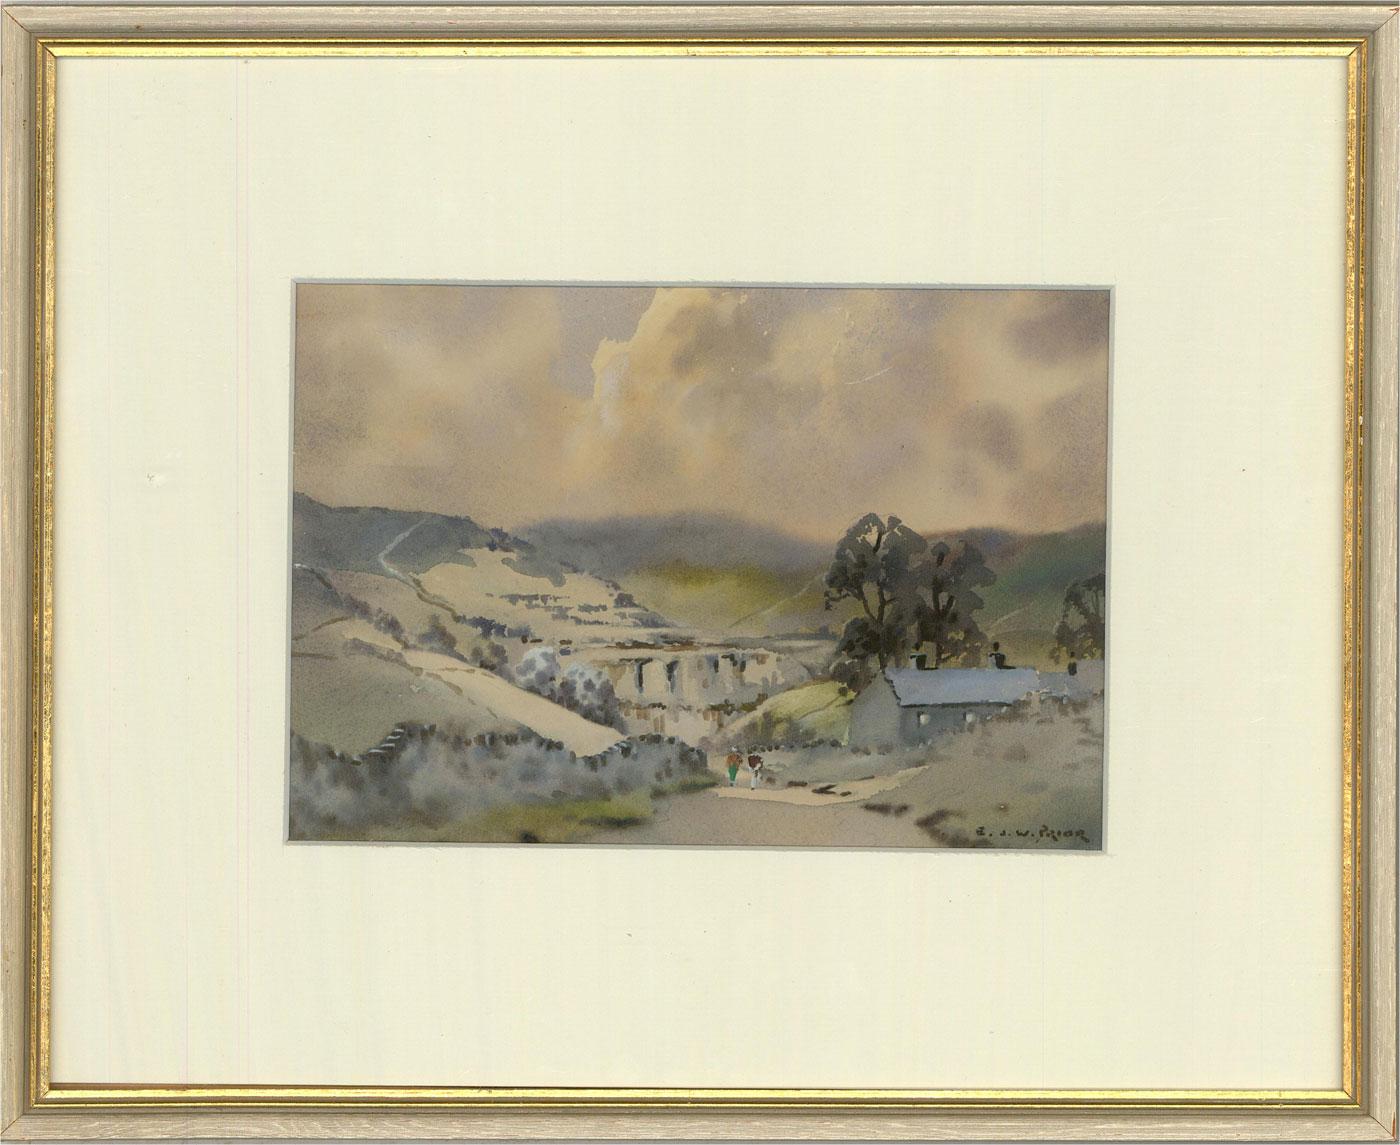 A delightful study of Malham Cove in North Yorkshire. The artist has used softly blended watercolours to create this tranquil country scene. Signed to the lower right, Well presented in a light wood frame with gilt details. On wove.
